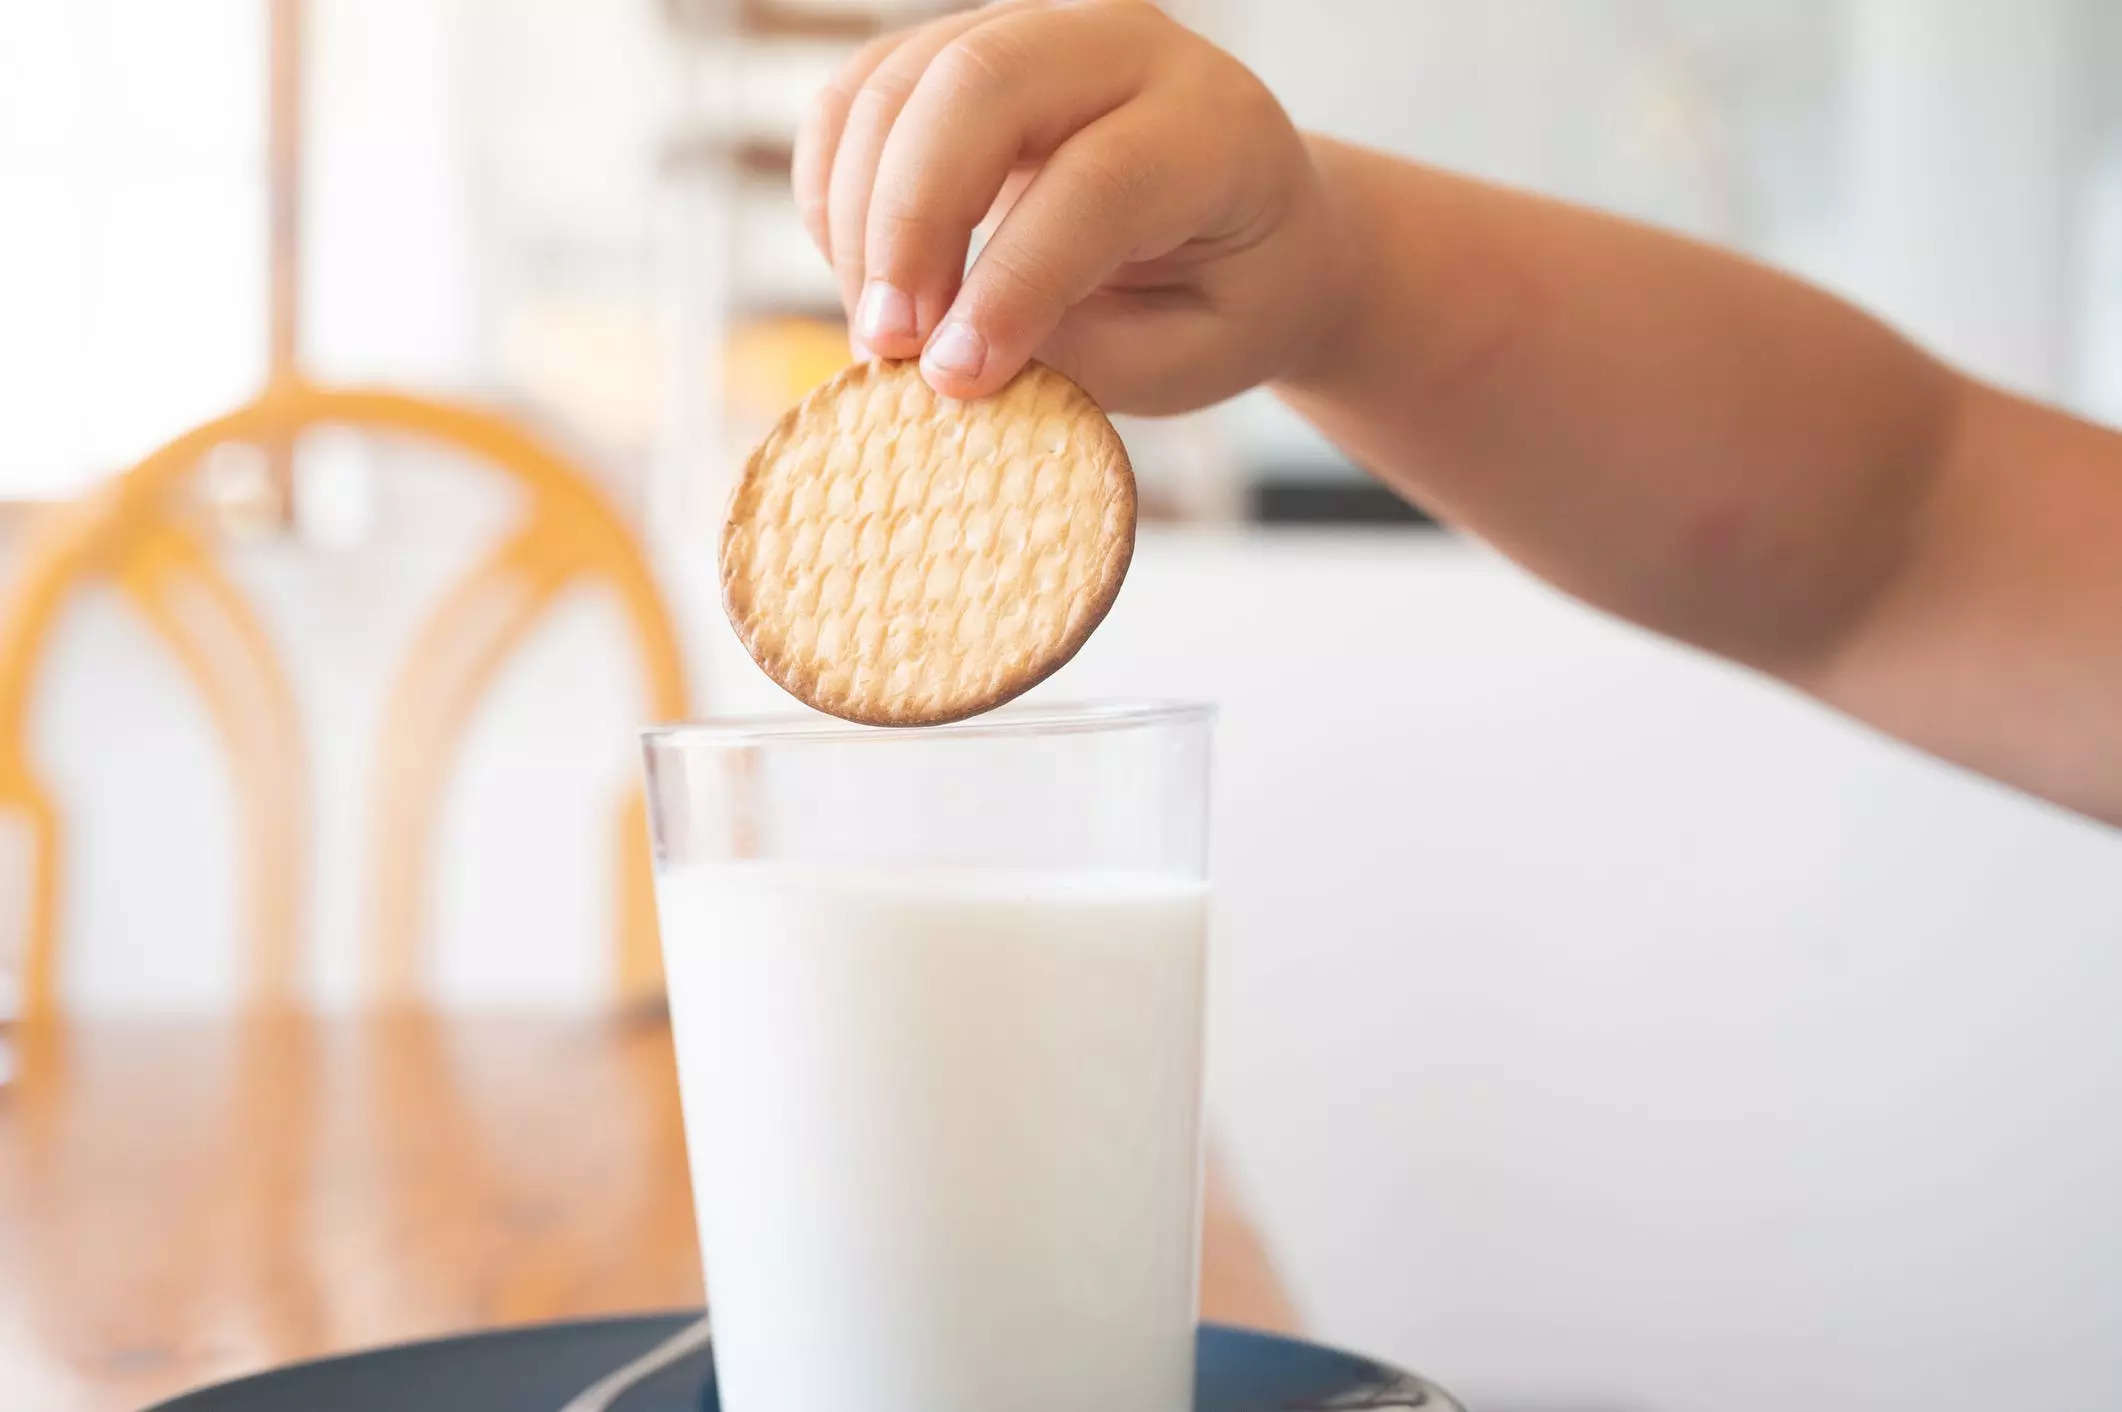 A child dunking a cookie in a glass of milk.